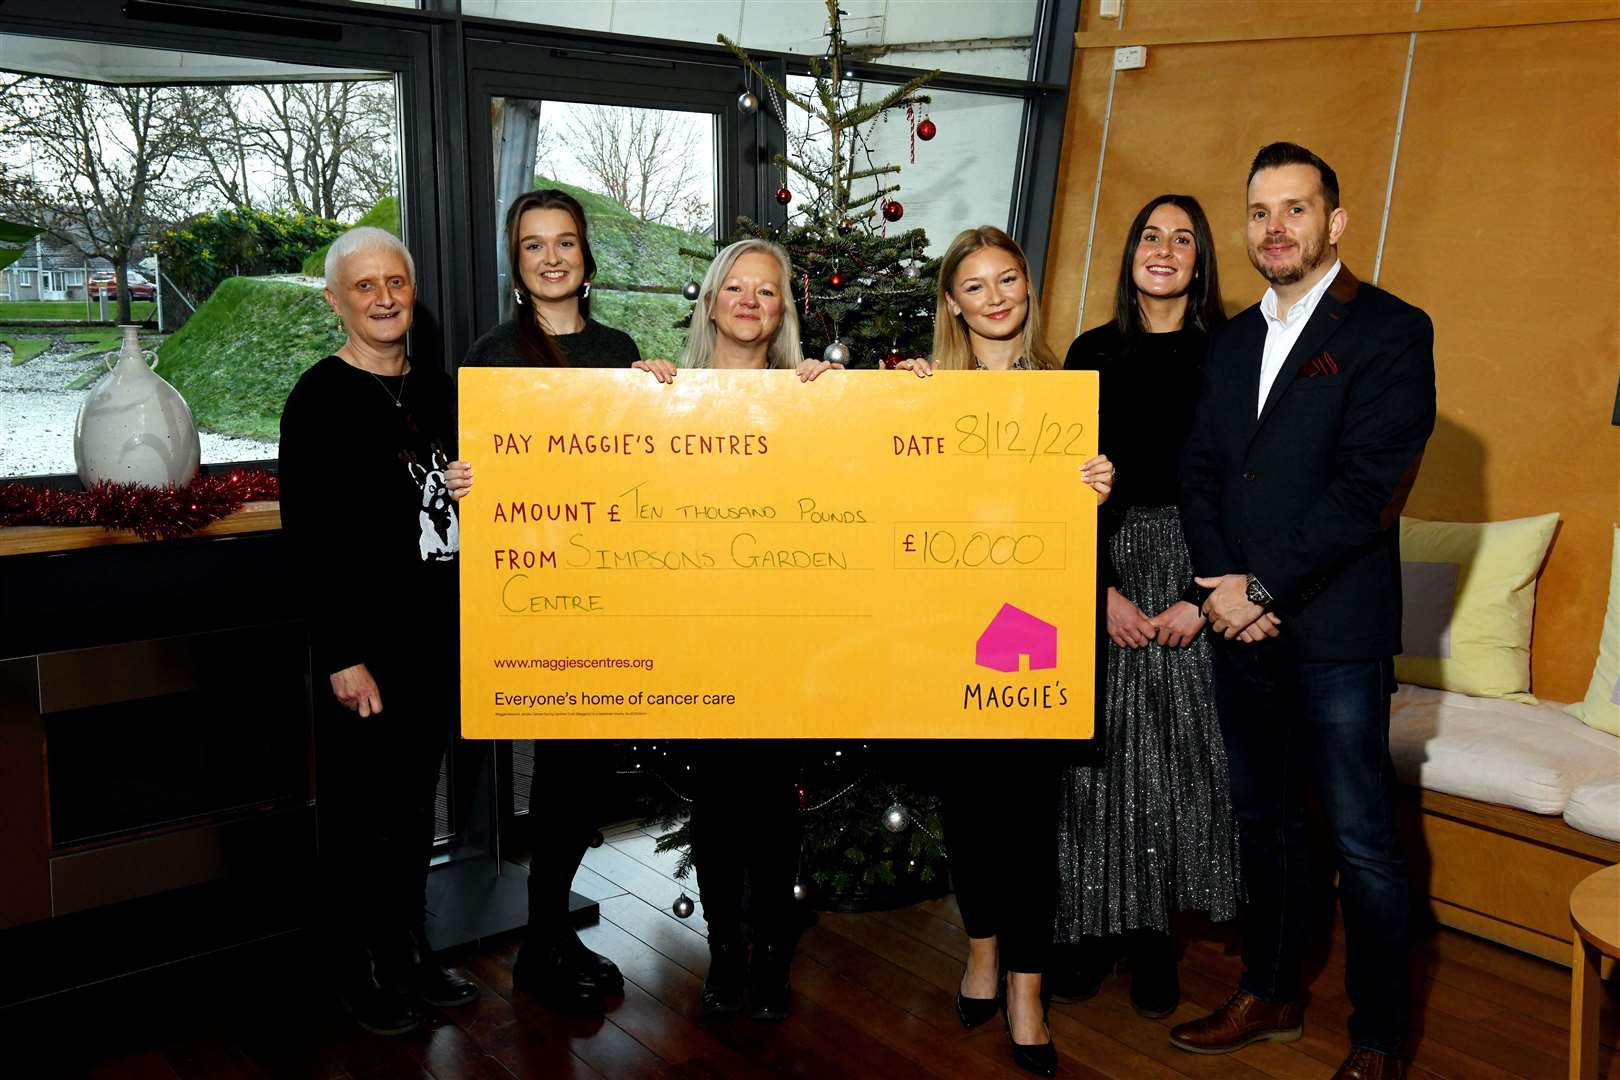 Janet Campbell, Lucy Taylor, and Siobhan Macbean, from Simpsons, presenting the £10,000 cheque to Mia Pimm, Katriona Statham, and Andrew Benjamin from Maggies Highland. Picture: James Mackenzie